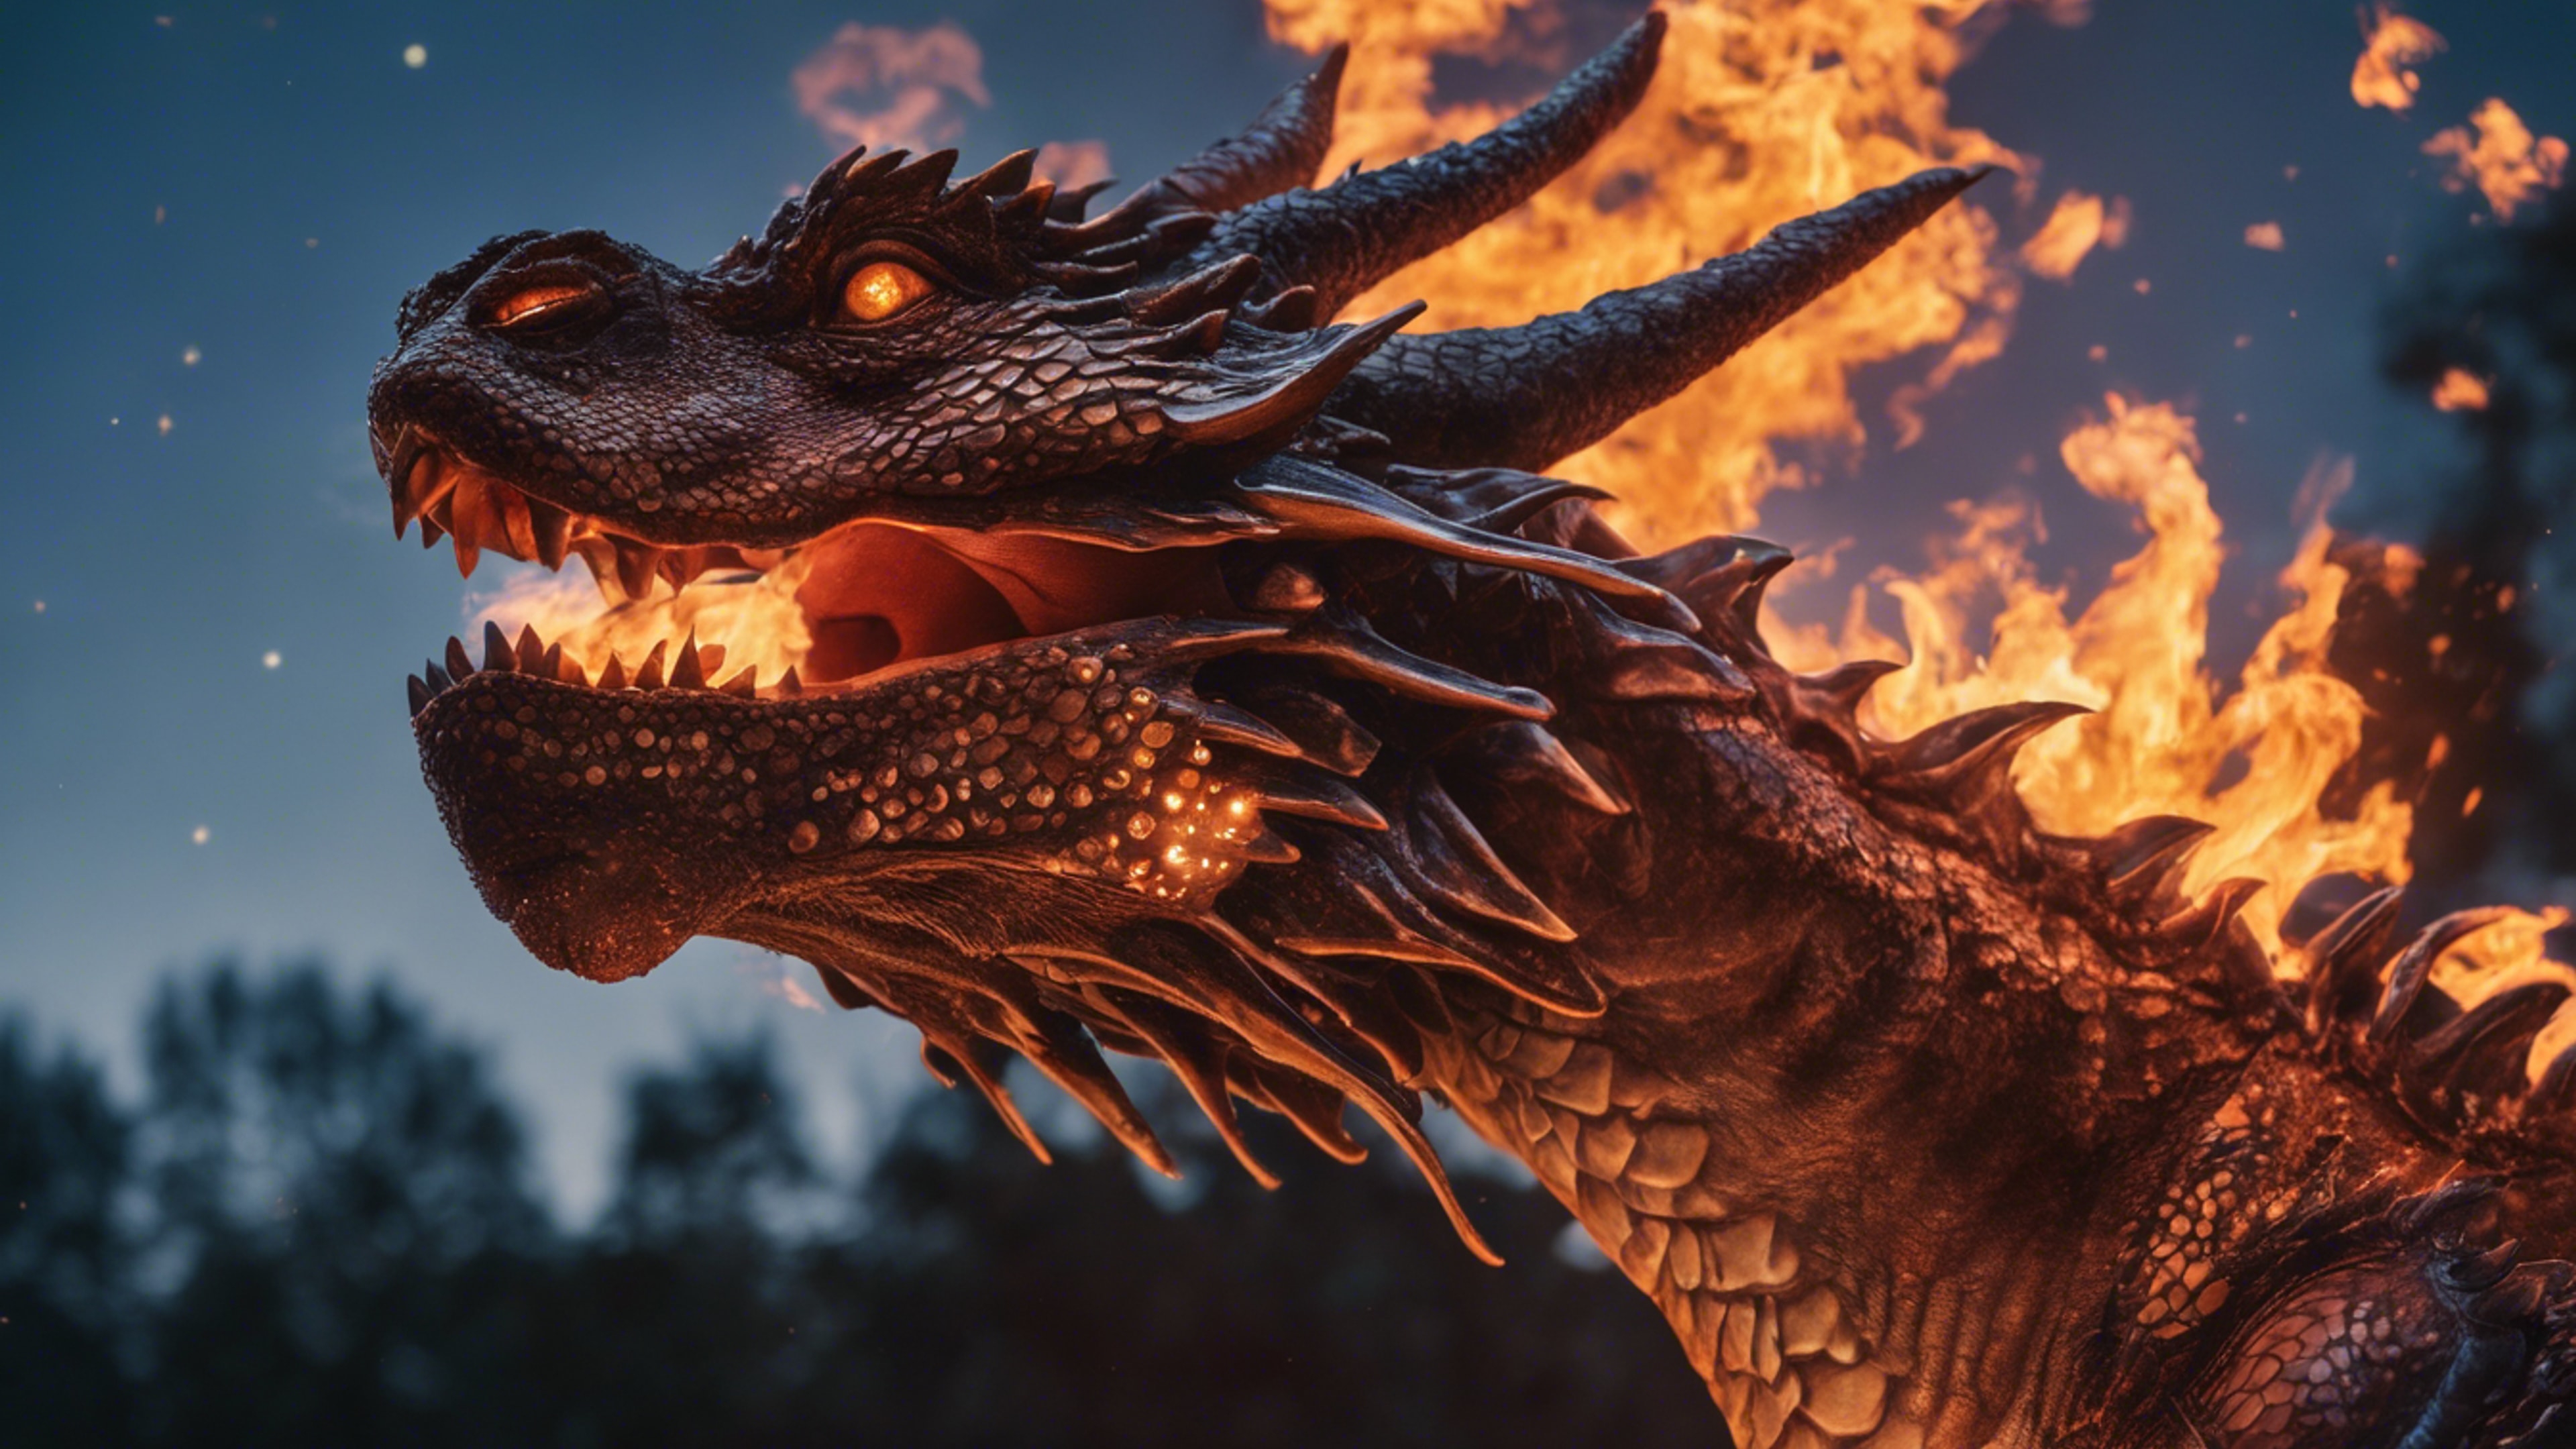 A fire-breathing dragon surrounded by the glow of its own flames against a night sky. duvar kağıdı[8f1bf836869843a19451]